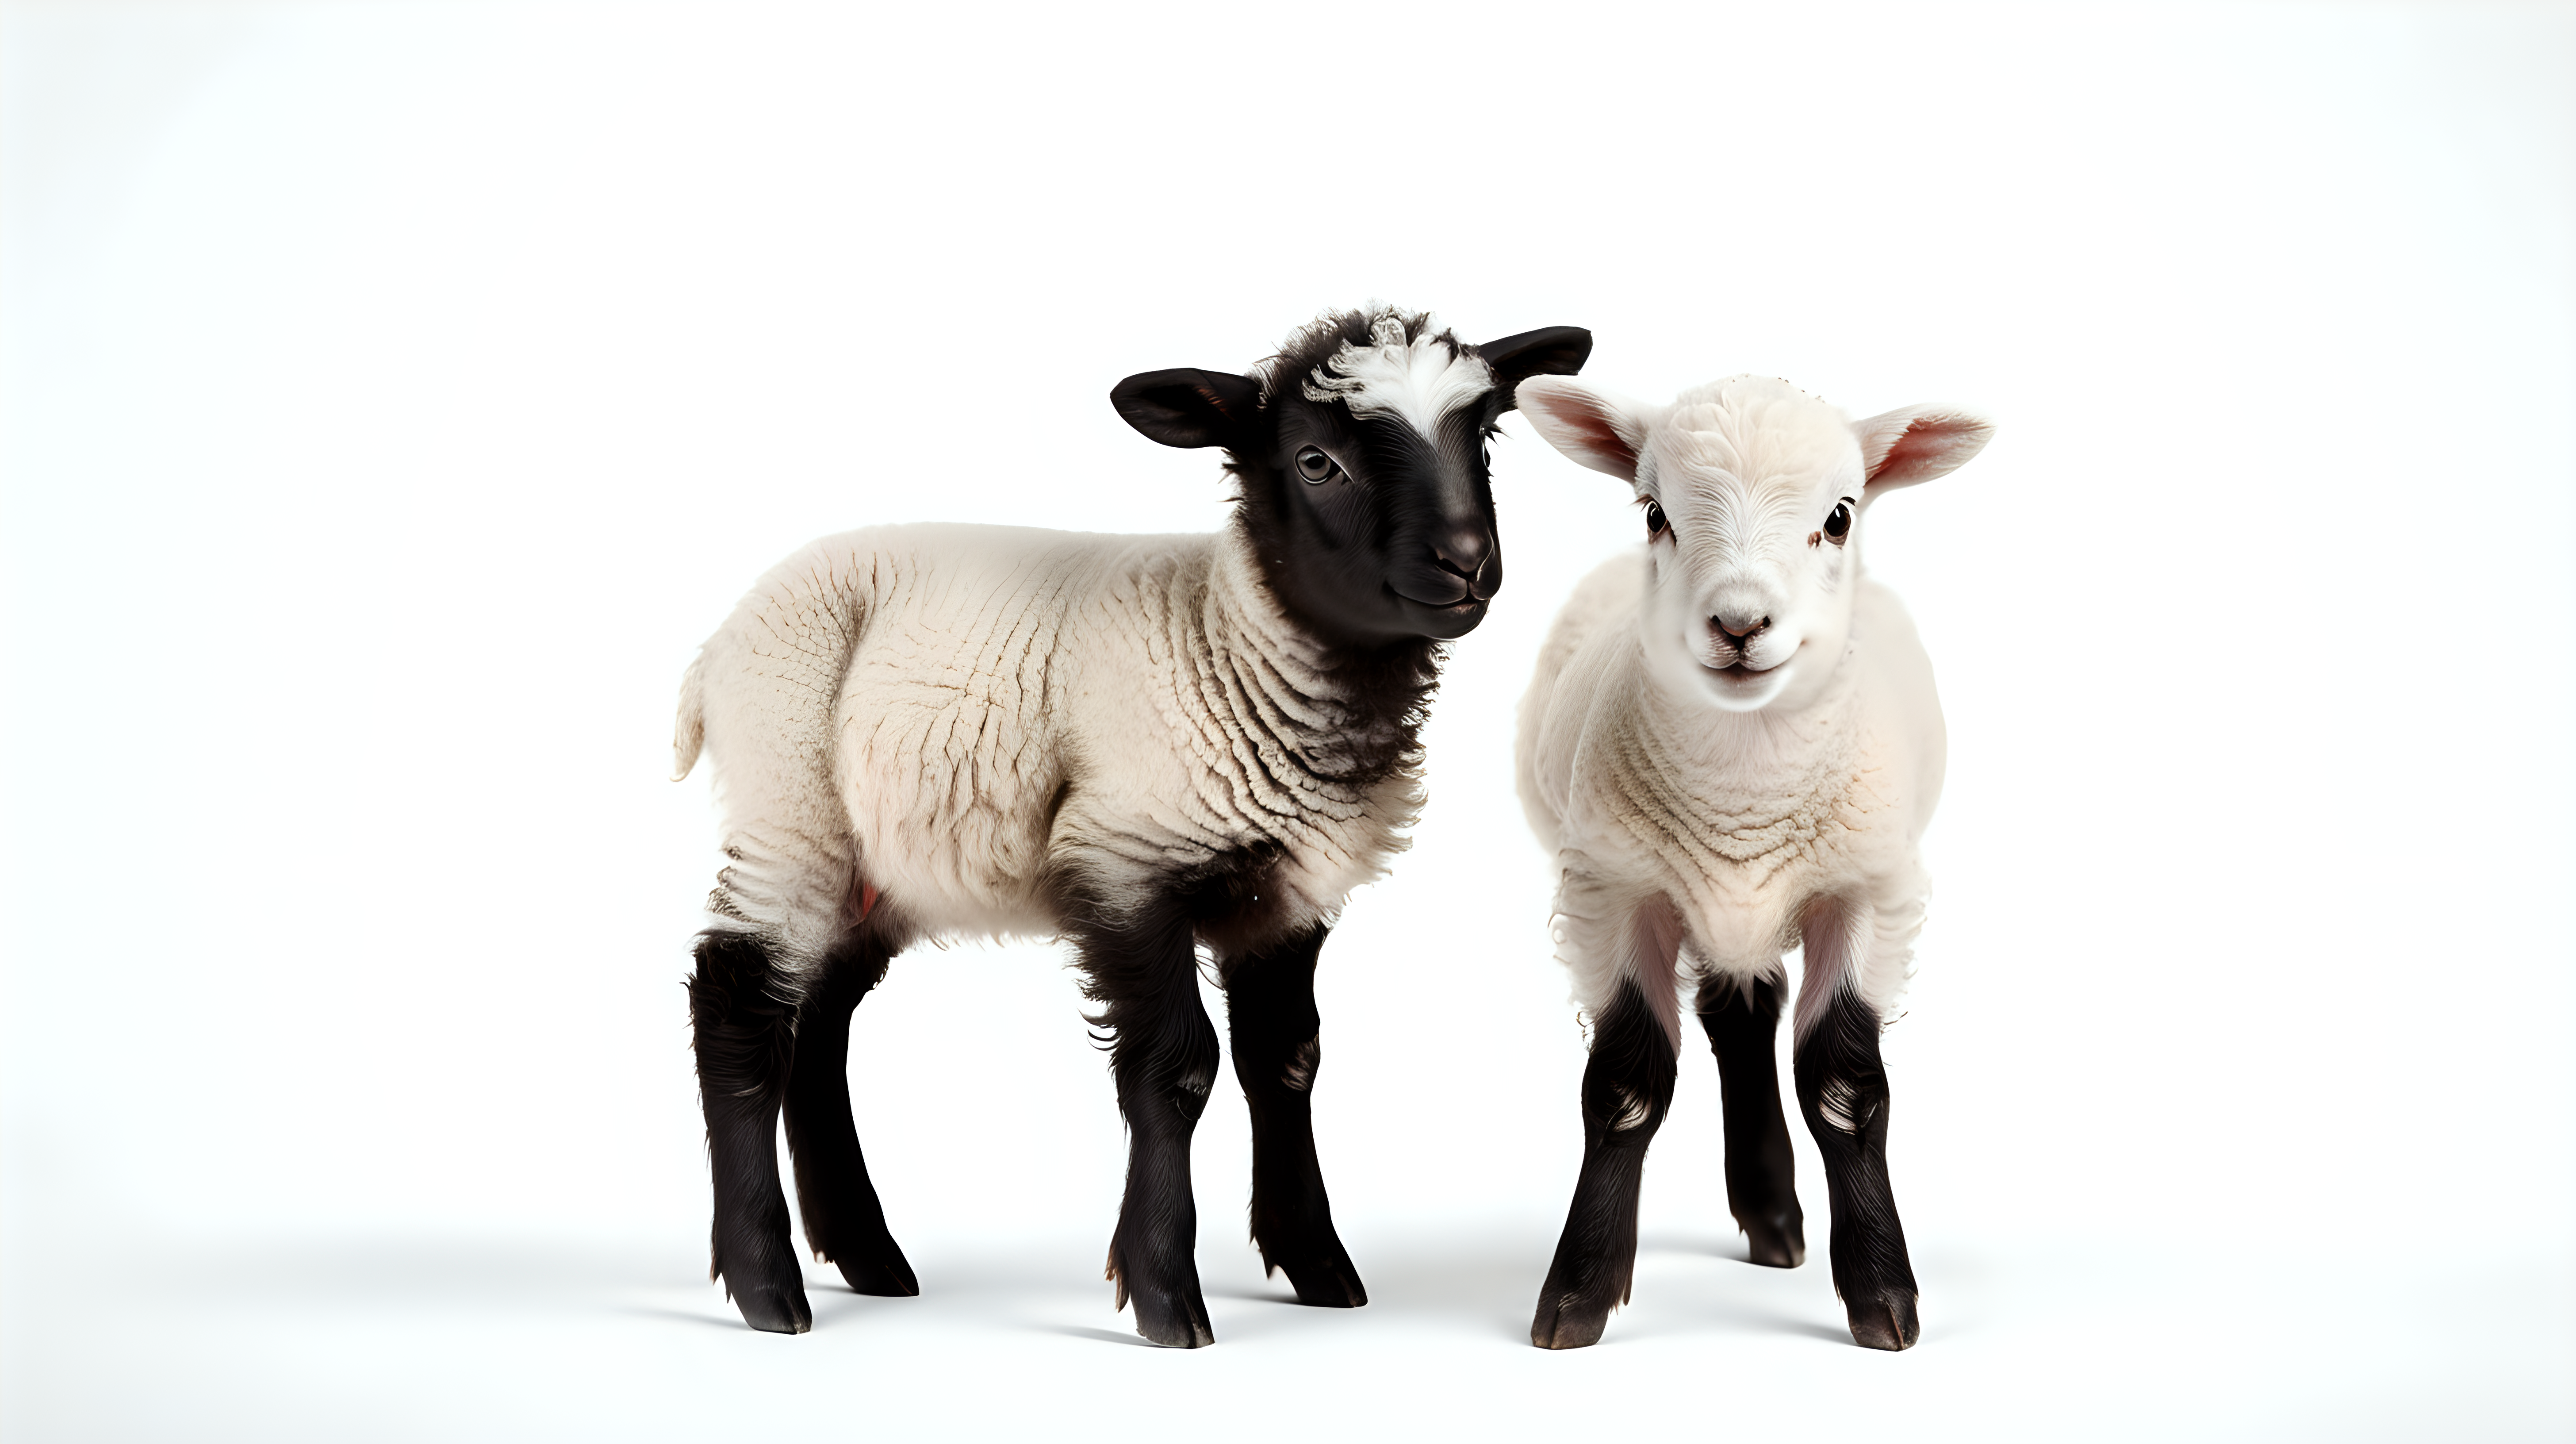 two baby sheep on white background isolated on